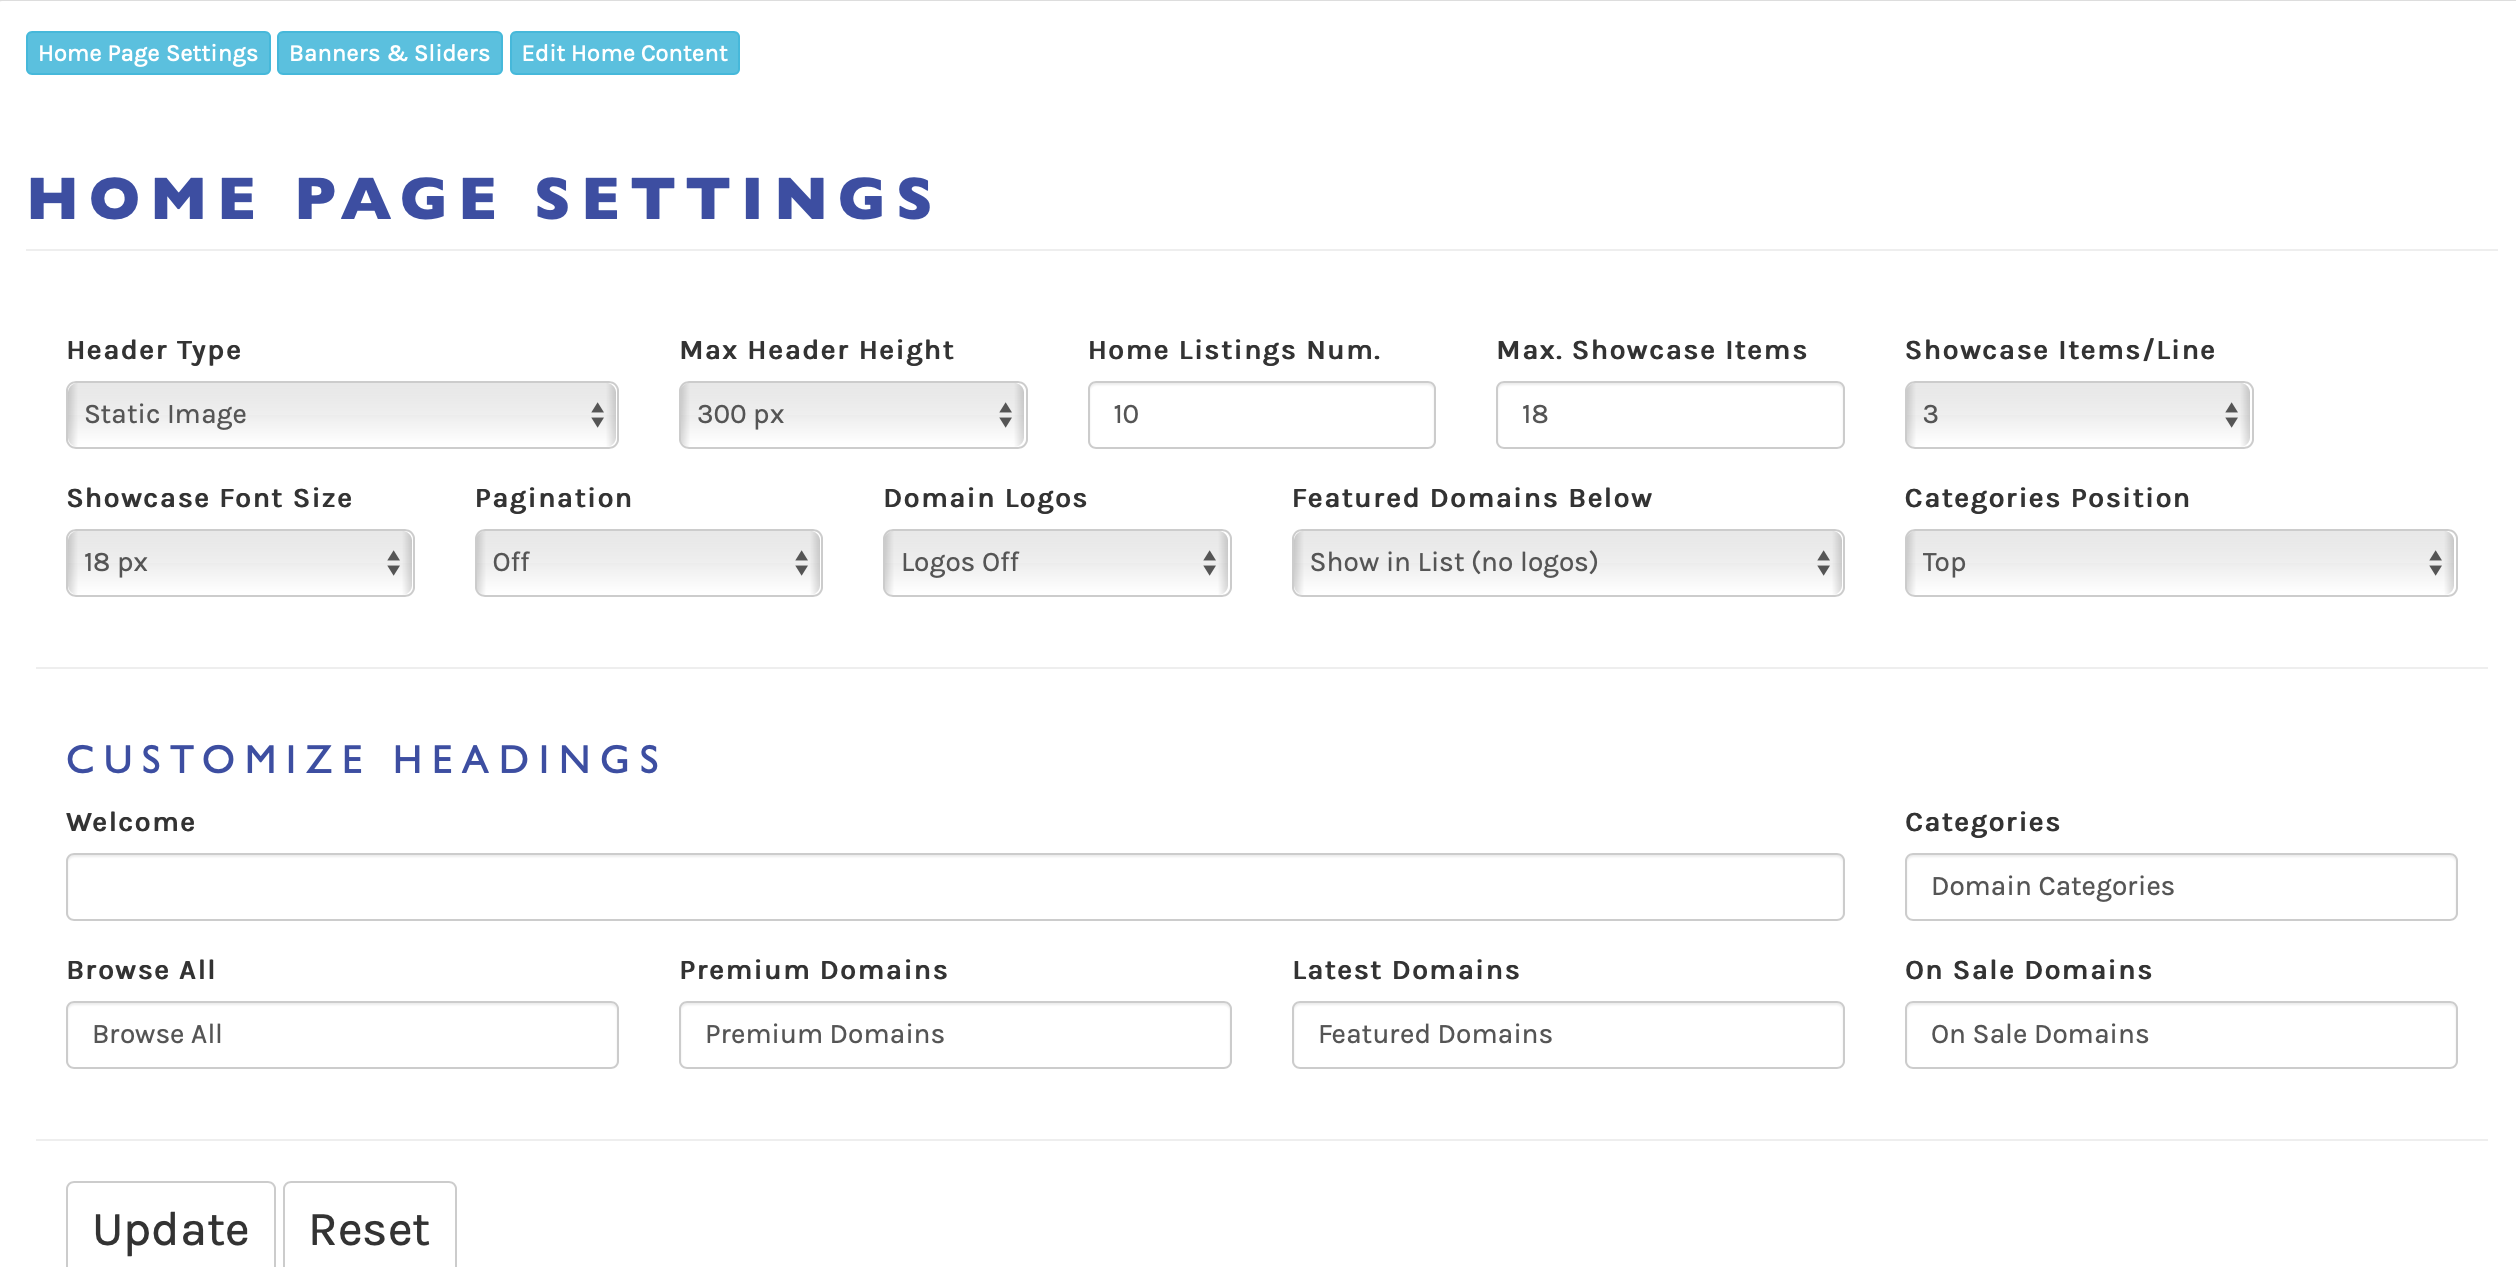 Home Page Settings Overview